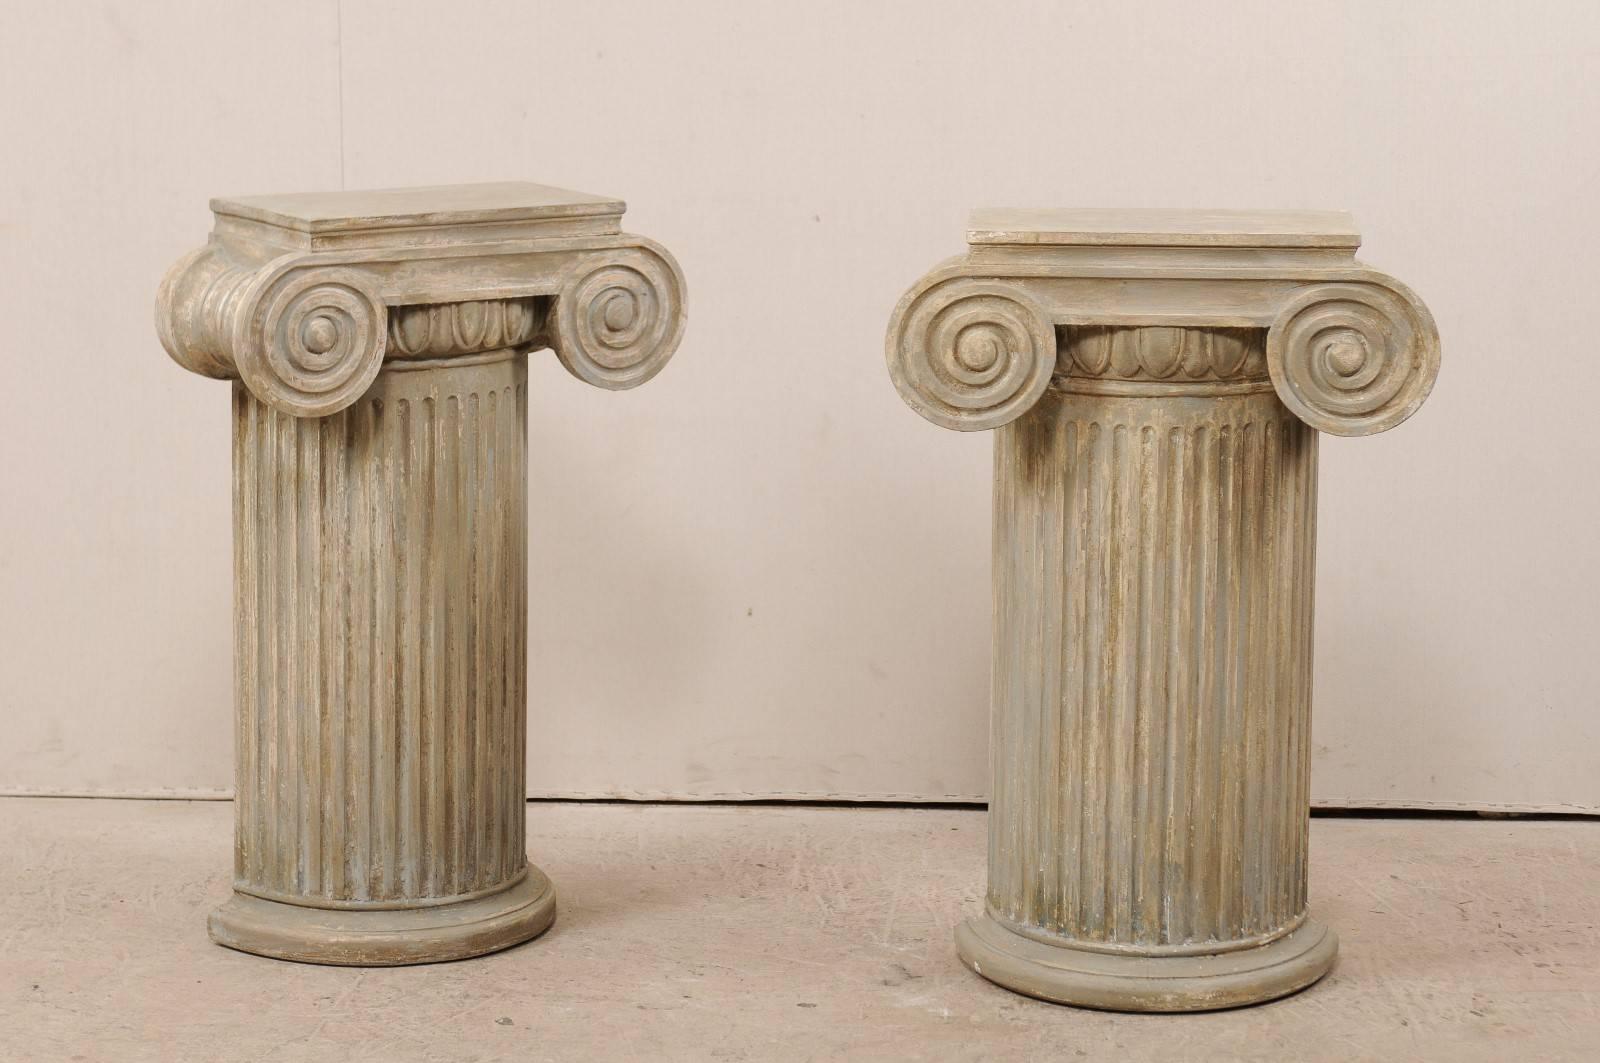 A pair of vintage American carved wood ionic column pedestals. This pair of pedestals are ionic style with rectangular-shaped tops over semi-rounded and fluted bodies, raised up on rounded bases. The overall color palette consists of various shades